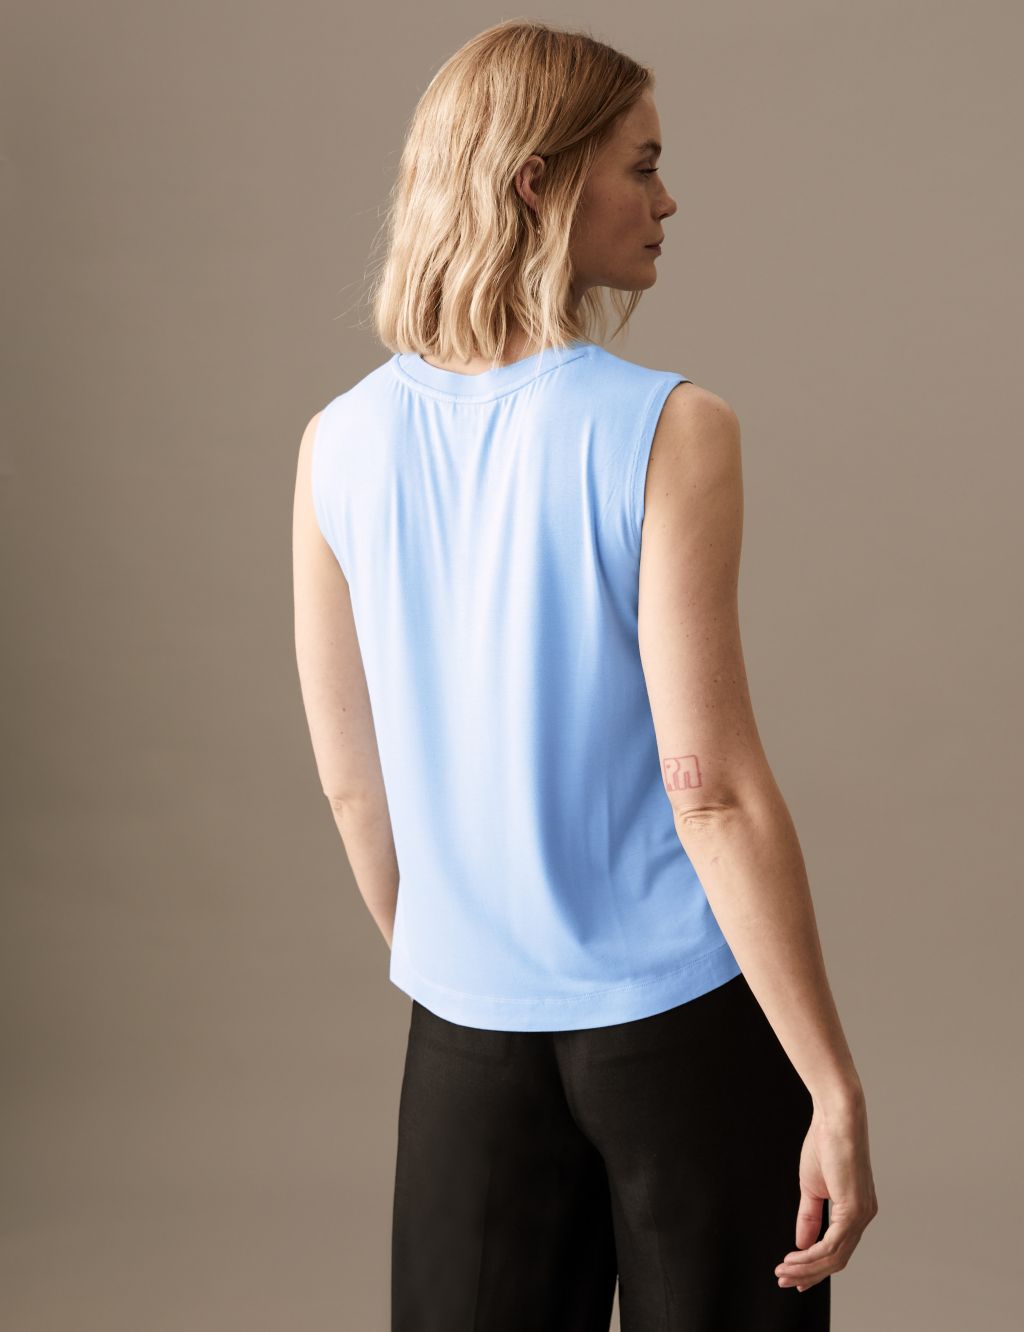 Jersey Crew Neck Relaxed Vest Top image 4